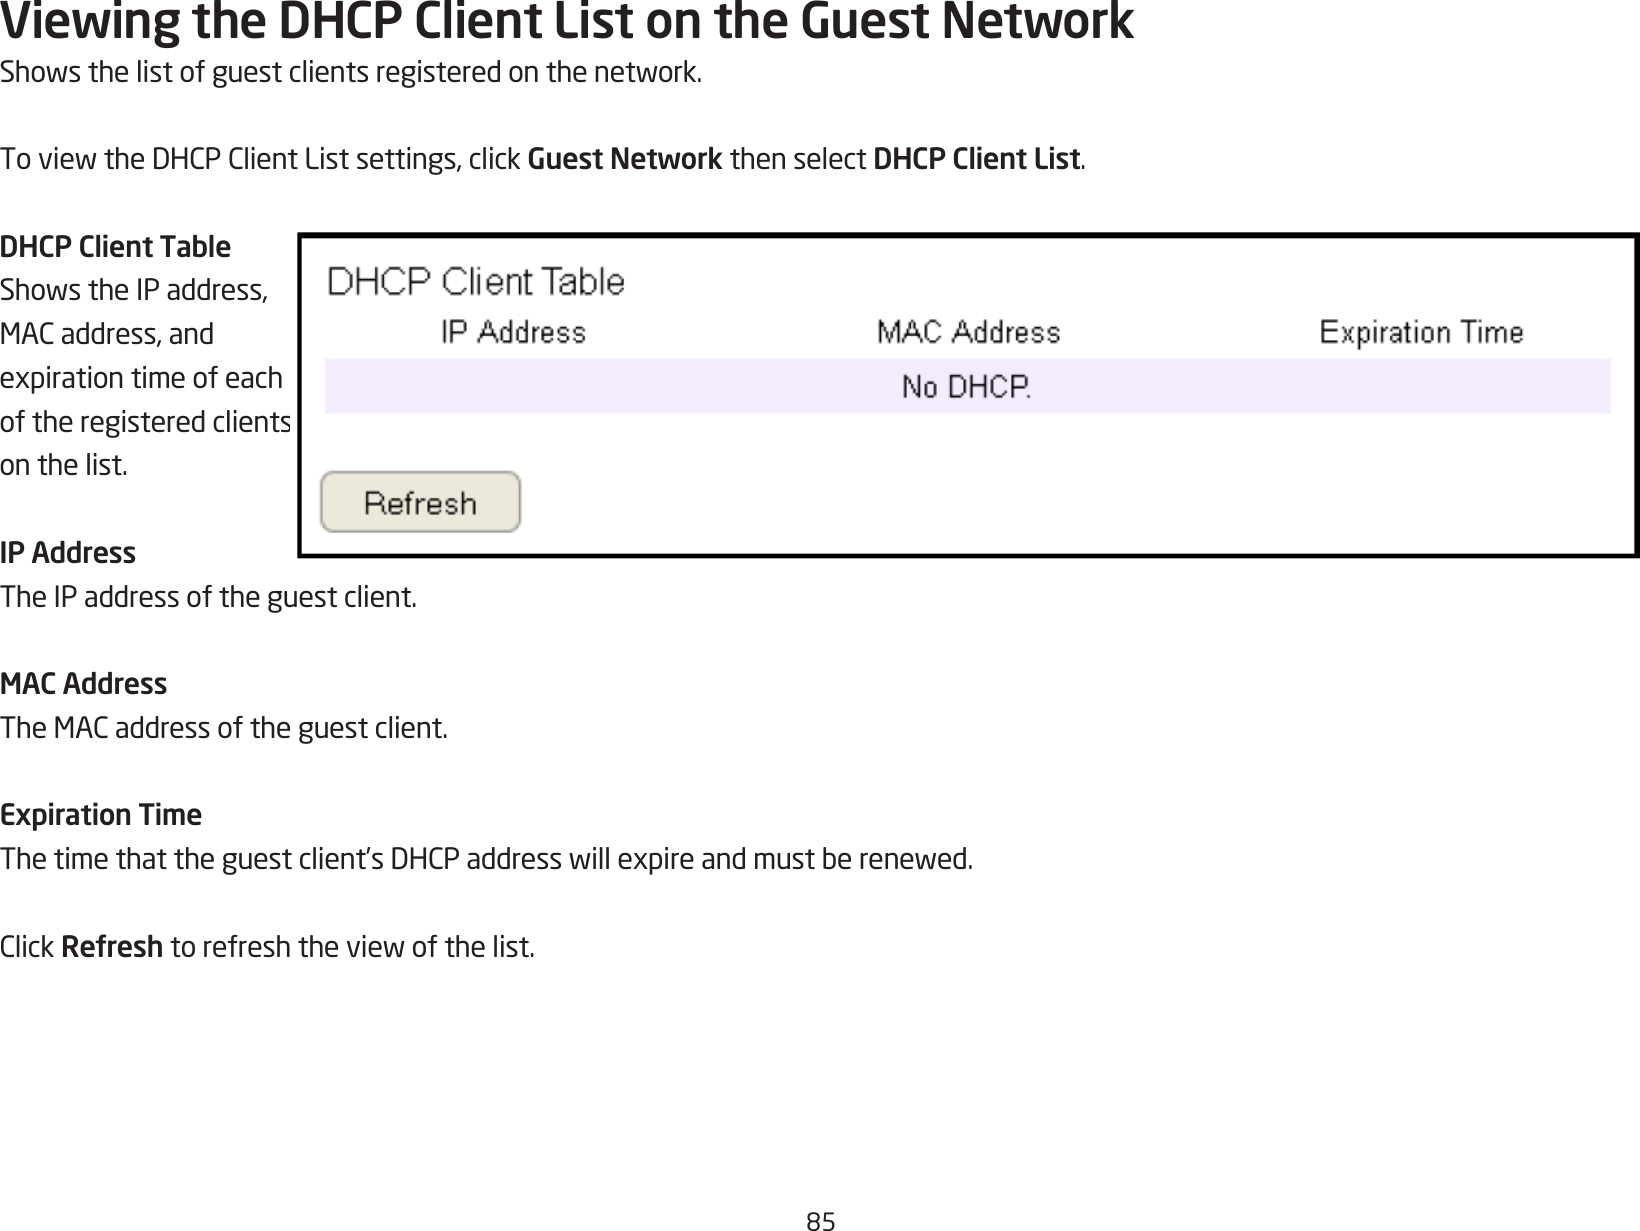 85Viewing the DHCP Client List on the Guest NetworkShowsthelistofguestclientsregisteredonthenetwork.ToviewtheDHCPClientListsettings,clickGuest Network then select DHCP Client List.DHCP Client TableShowstheIPaddress,MACaddress,andexpirationtimeofeachof the registered clients on the list.IP AddressThe IP address of the guest client.MAC AddressTheMACaddressoftheguestclient.Expiration TimeThetimethattheguestclient’sDHCPaddresswillexpireandmustberenewed.ClickRefreshtorefreshtheviewofthelist.